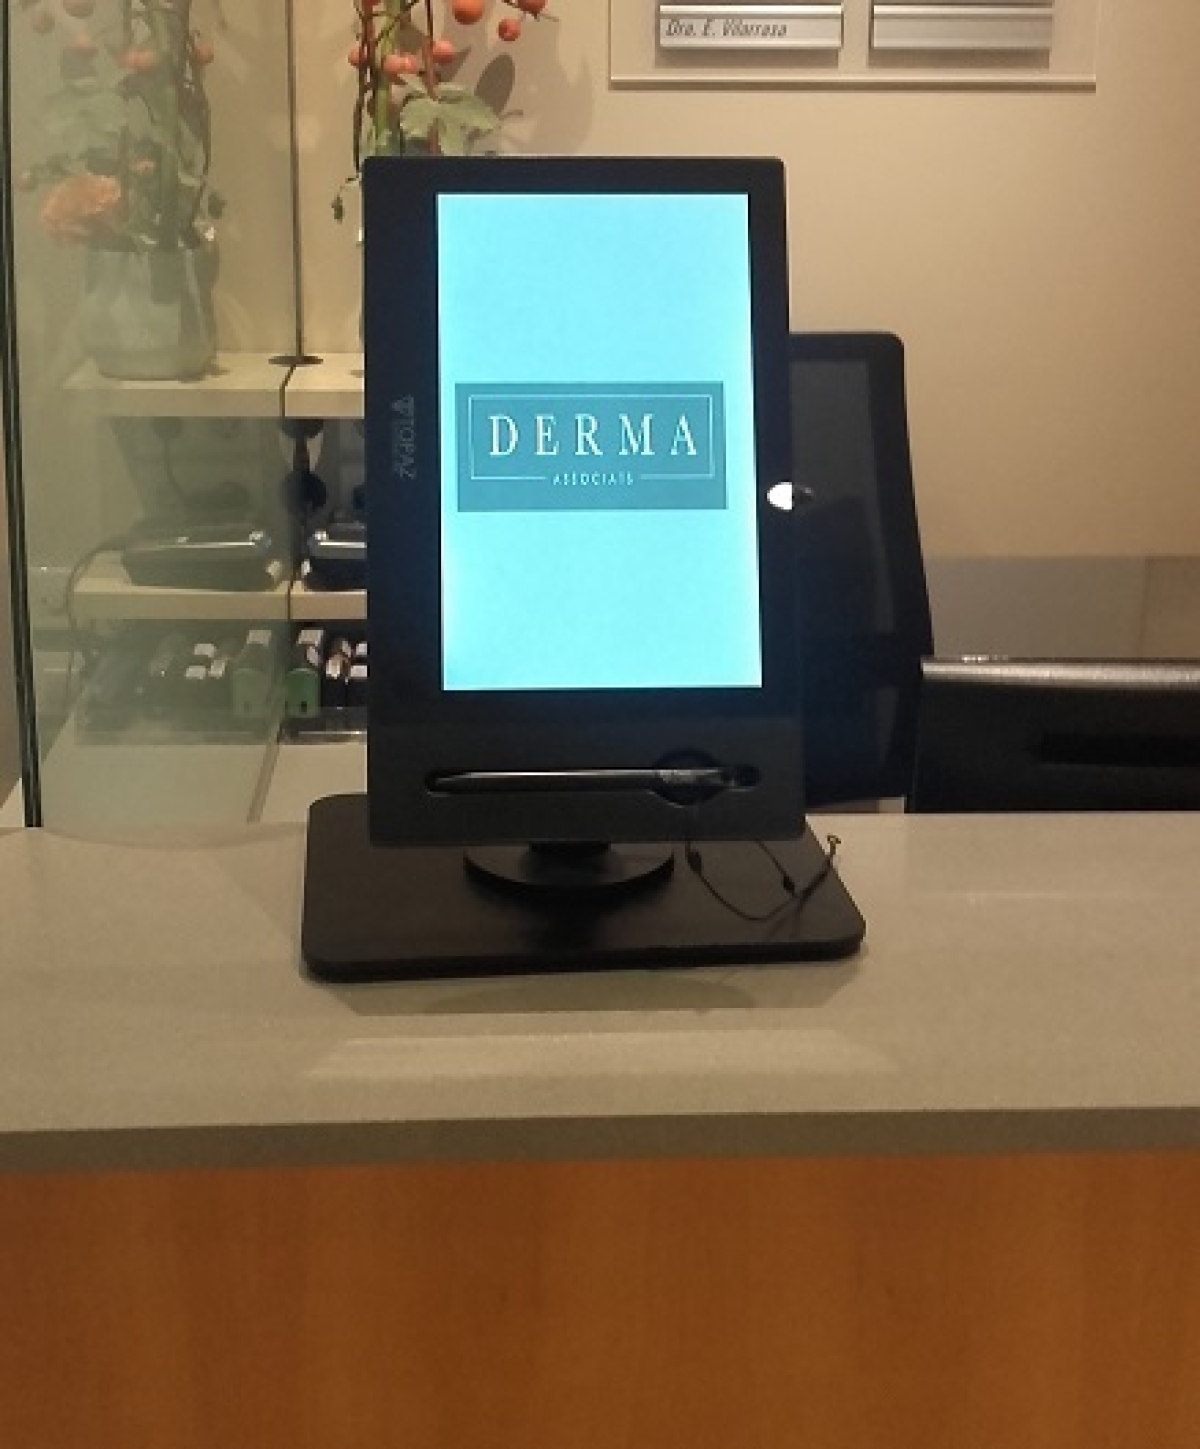 Teknon Hospital in Barcelona is now using our TOPAZ tablet stand for patient data protection